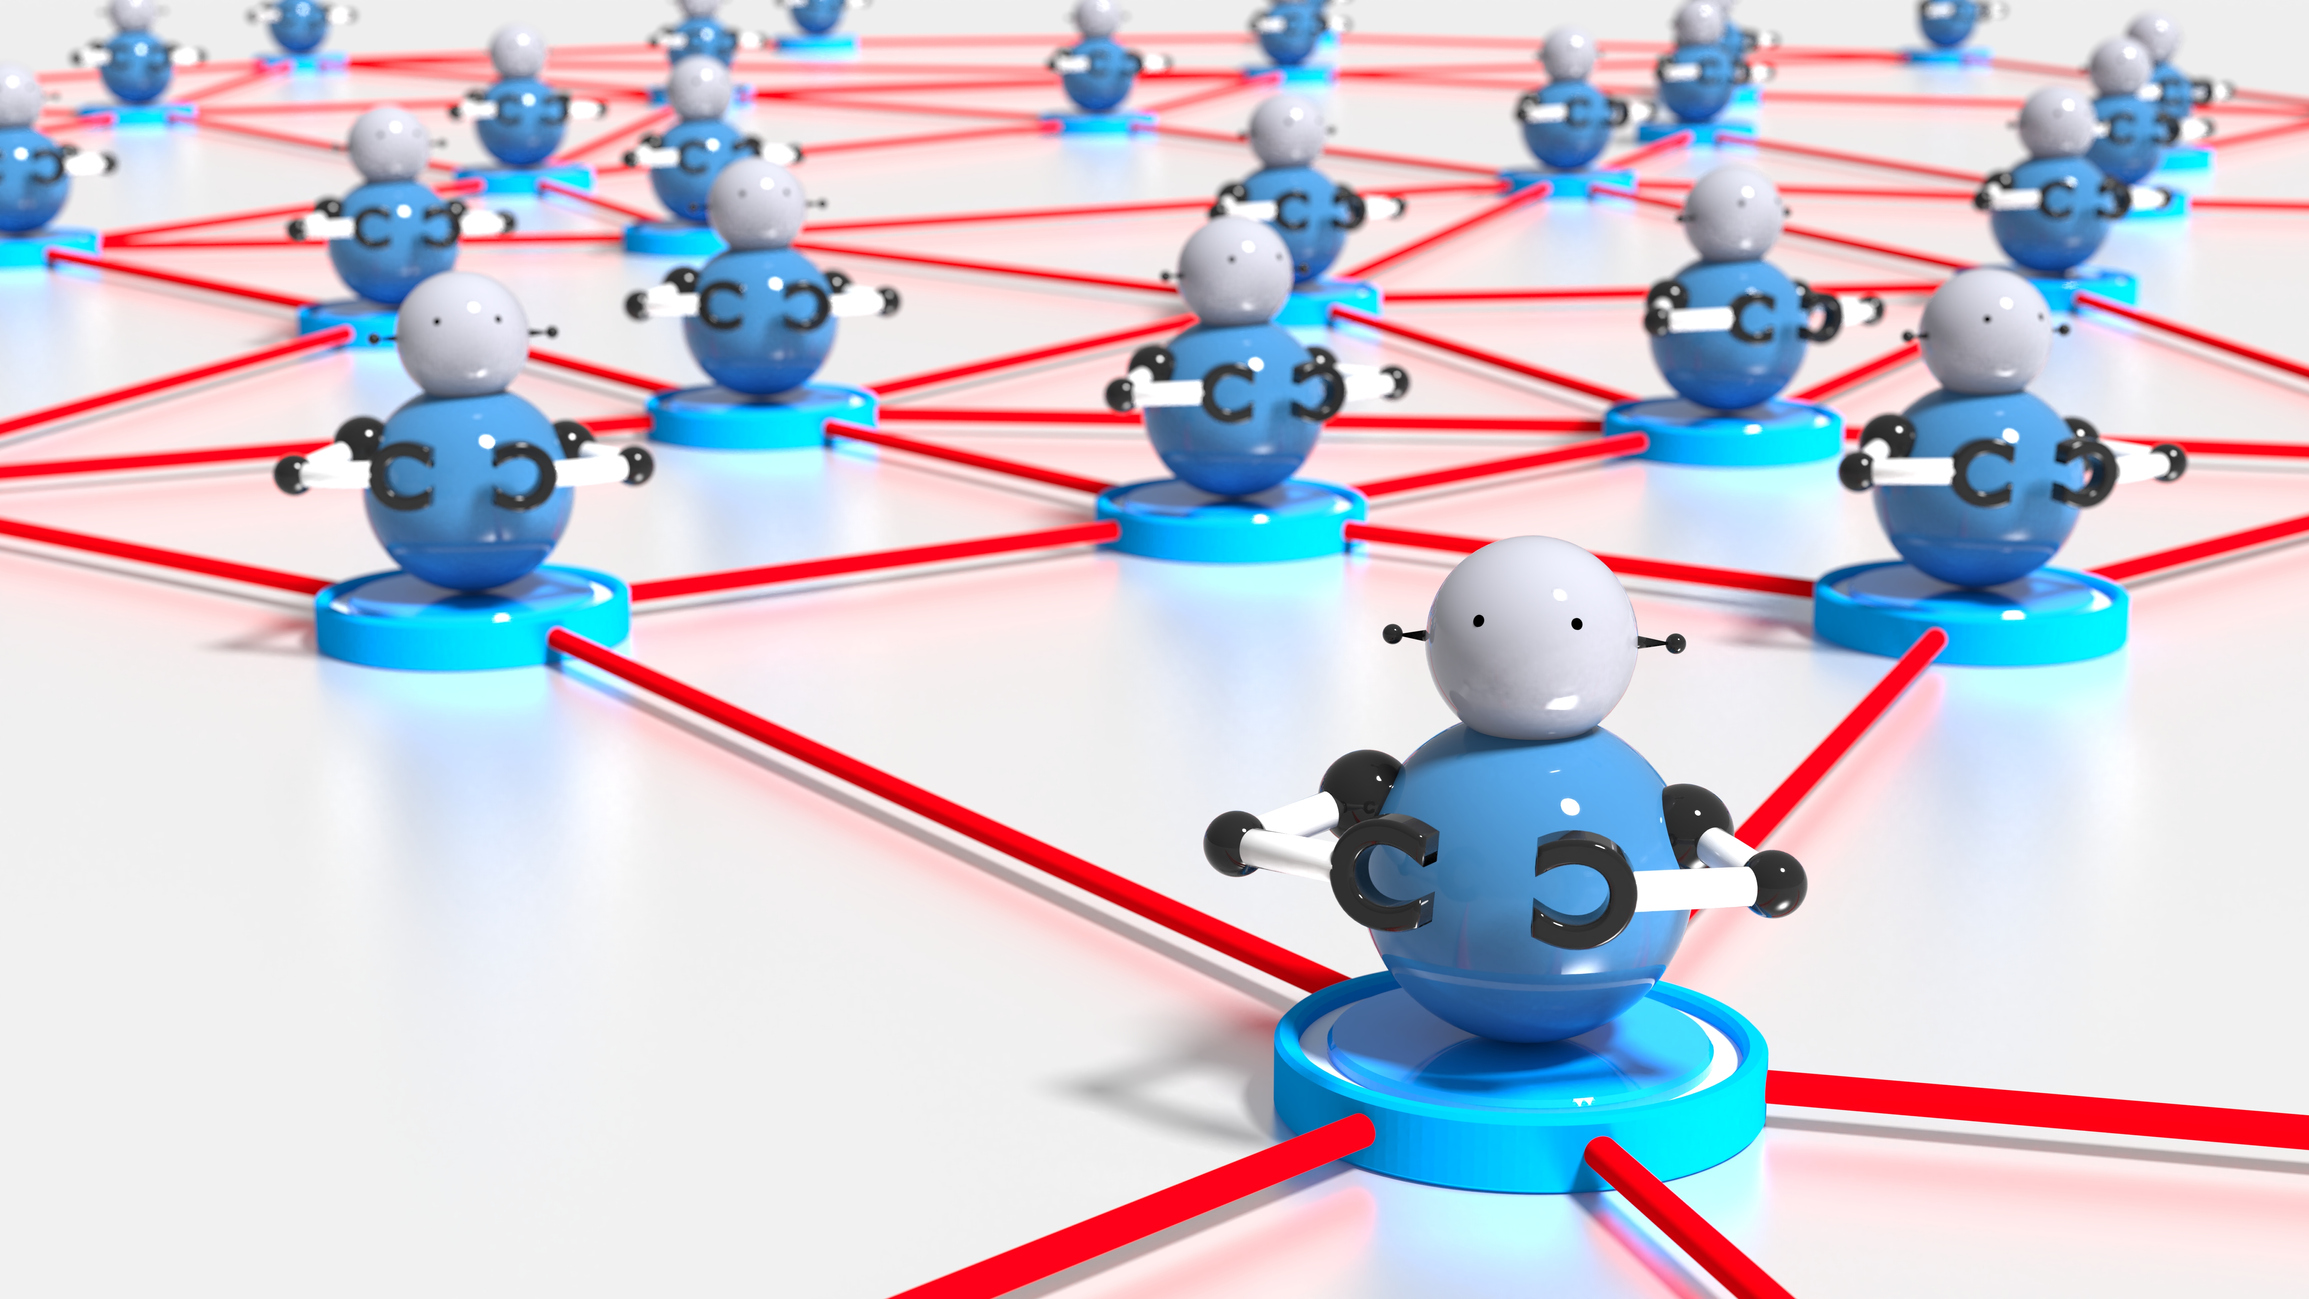 Network of platforms with bots on top botnet cybersecurity concept 3D illustration